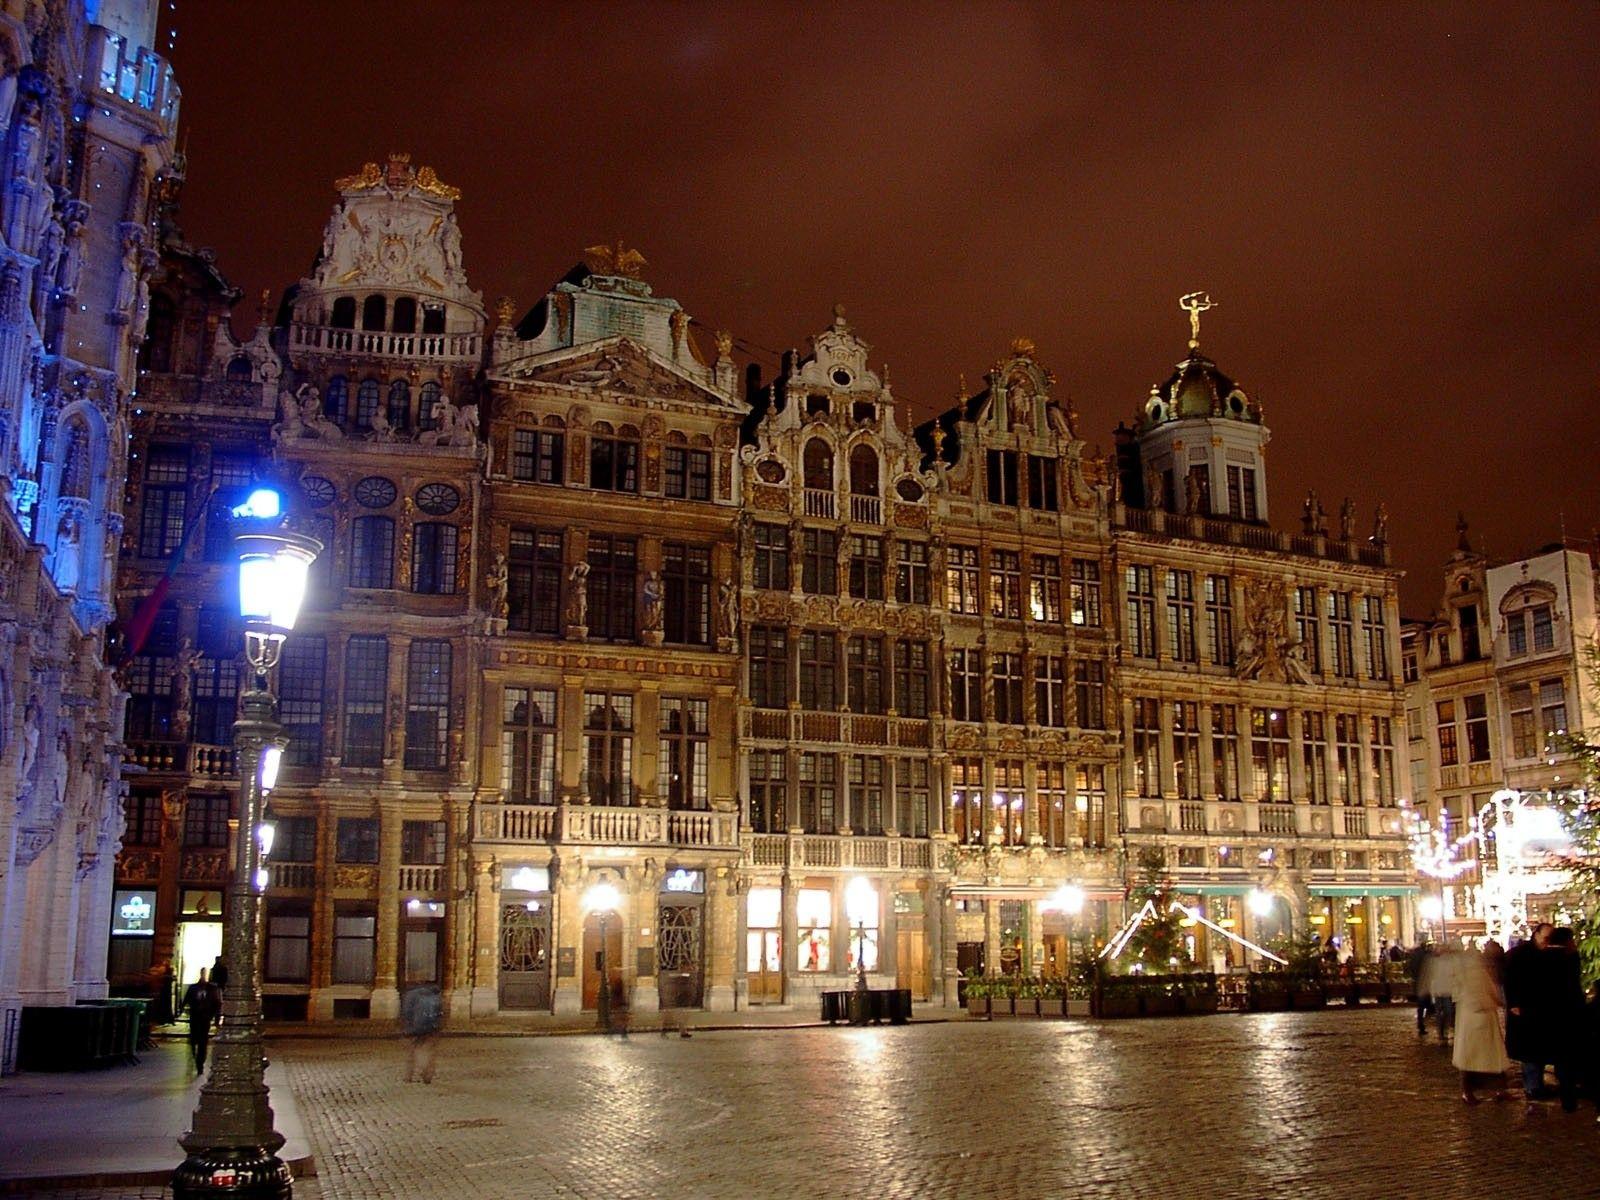 brussels grand place picture, brussels grand place photo, brussels